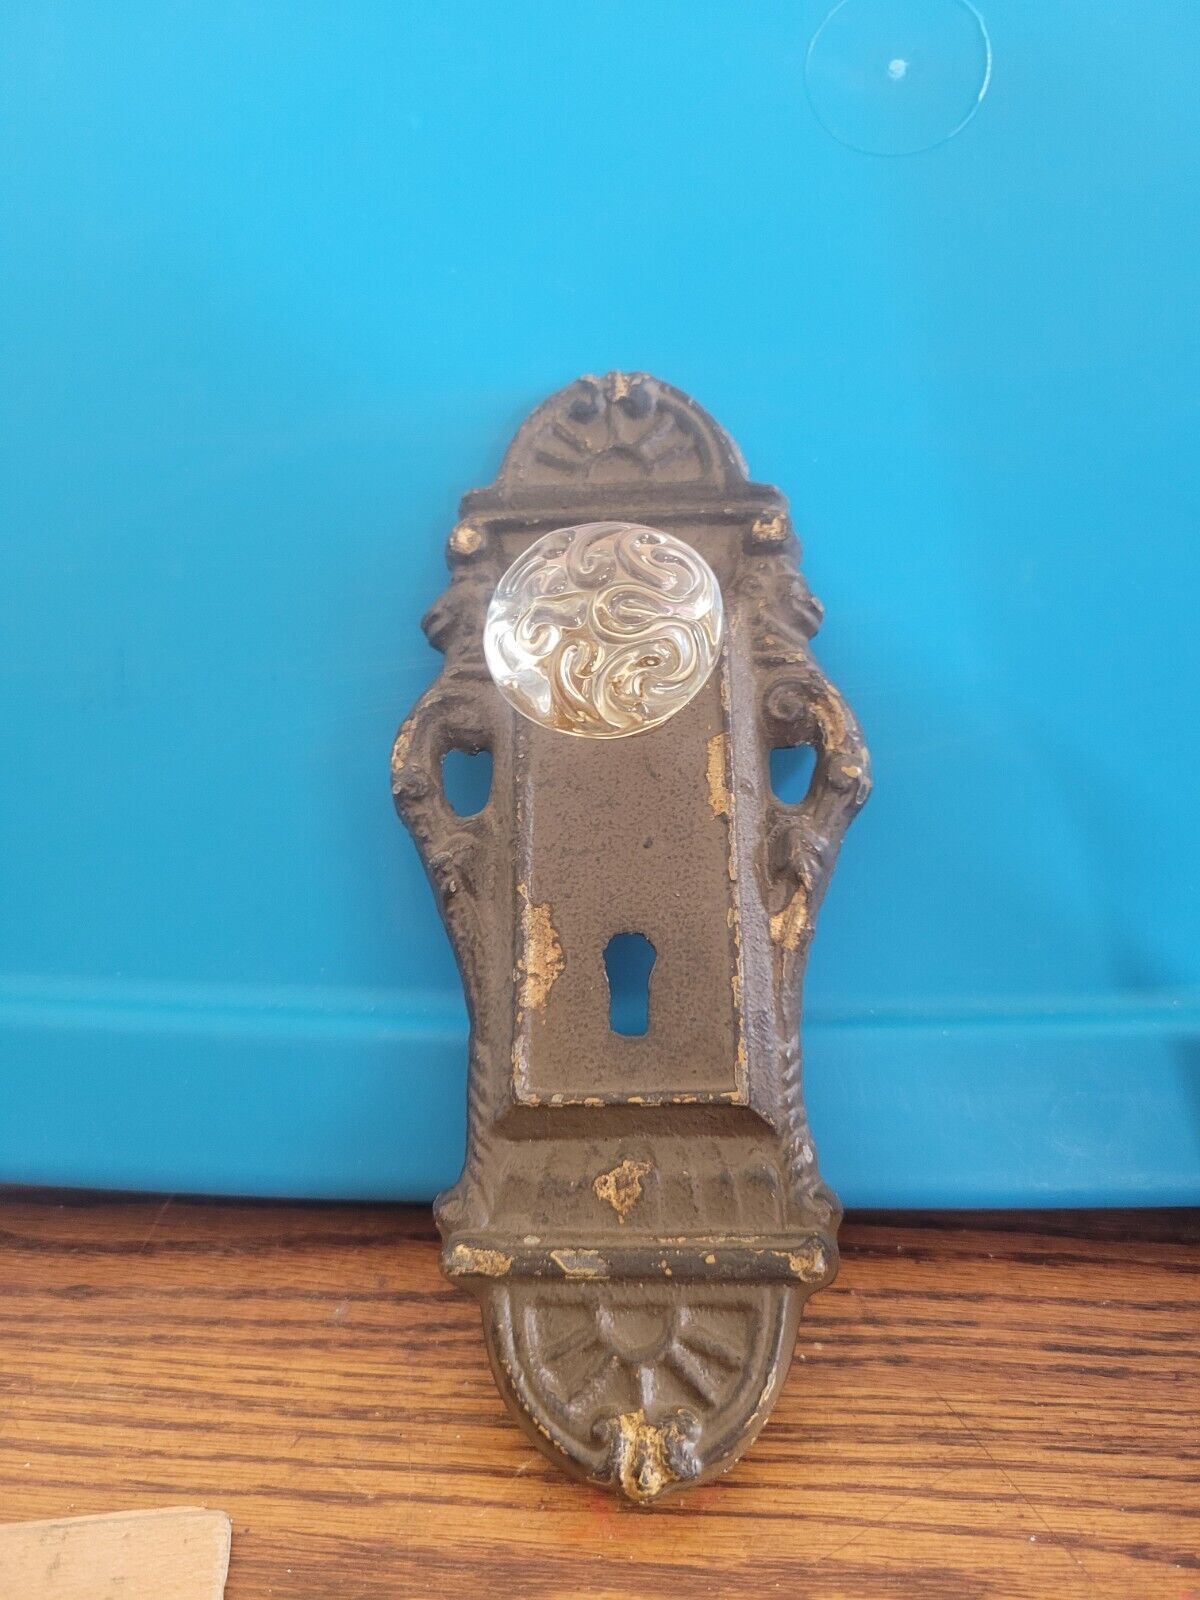 Antique Door Knob With Cast Iron Bracket With Key Hole And Hook To Hang